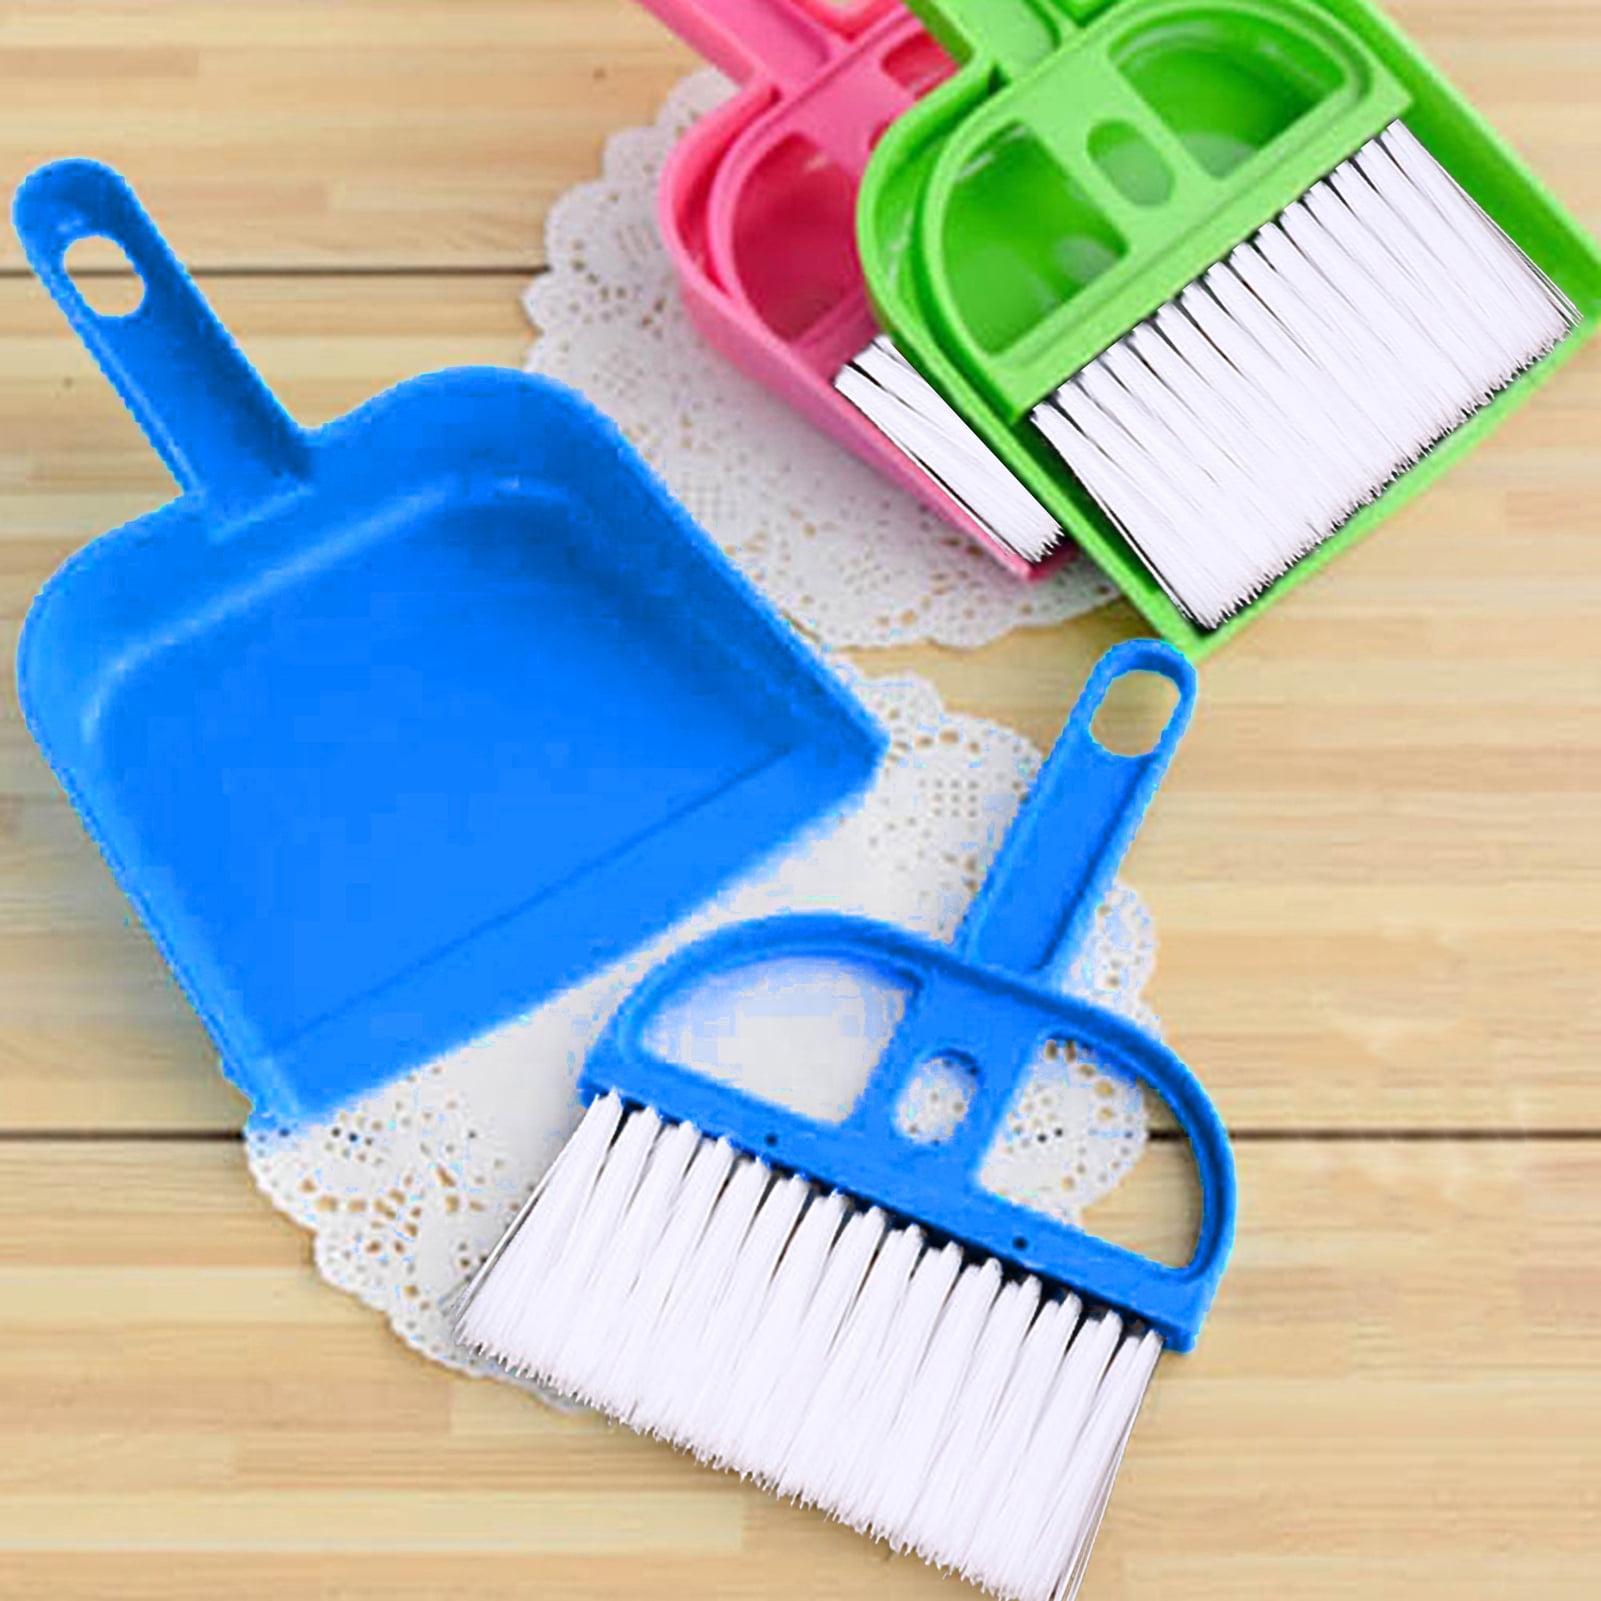 Wellco 10.6 in. Mini Brush and Dustpan Set (2-Pack) BDS10671G1 - The Home  Depot